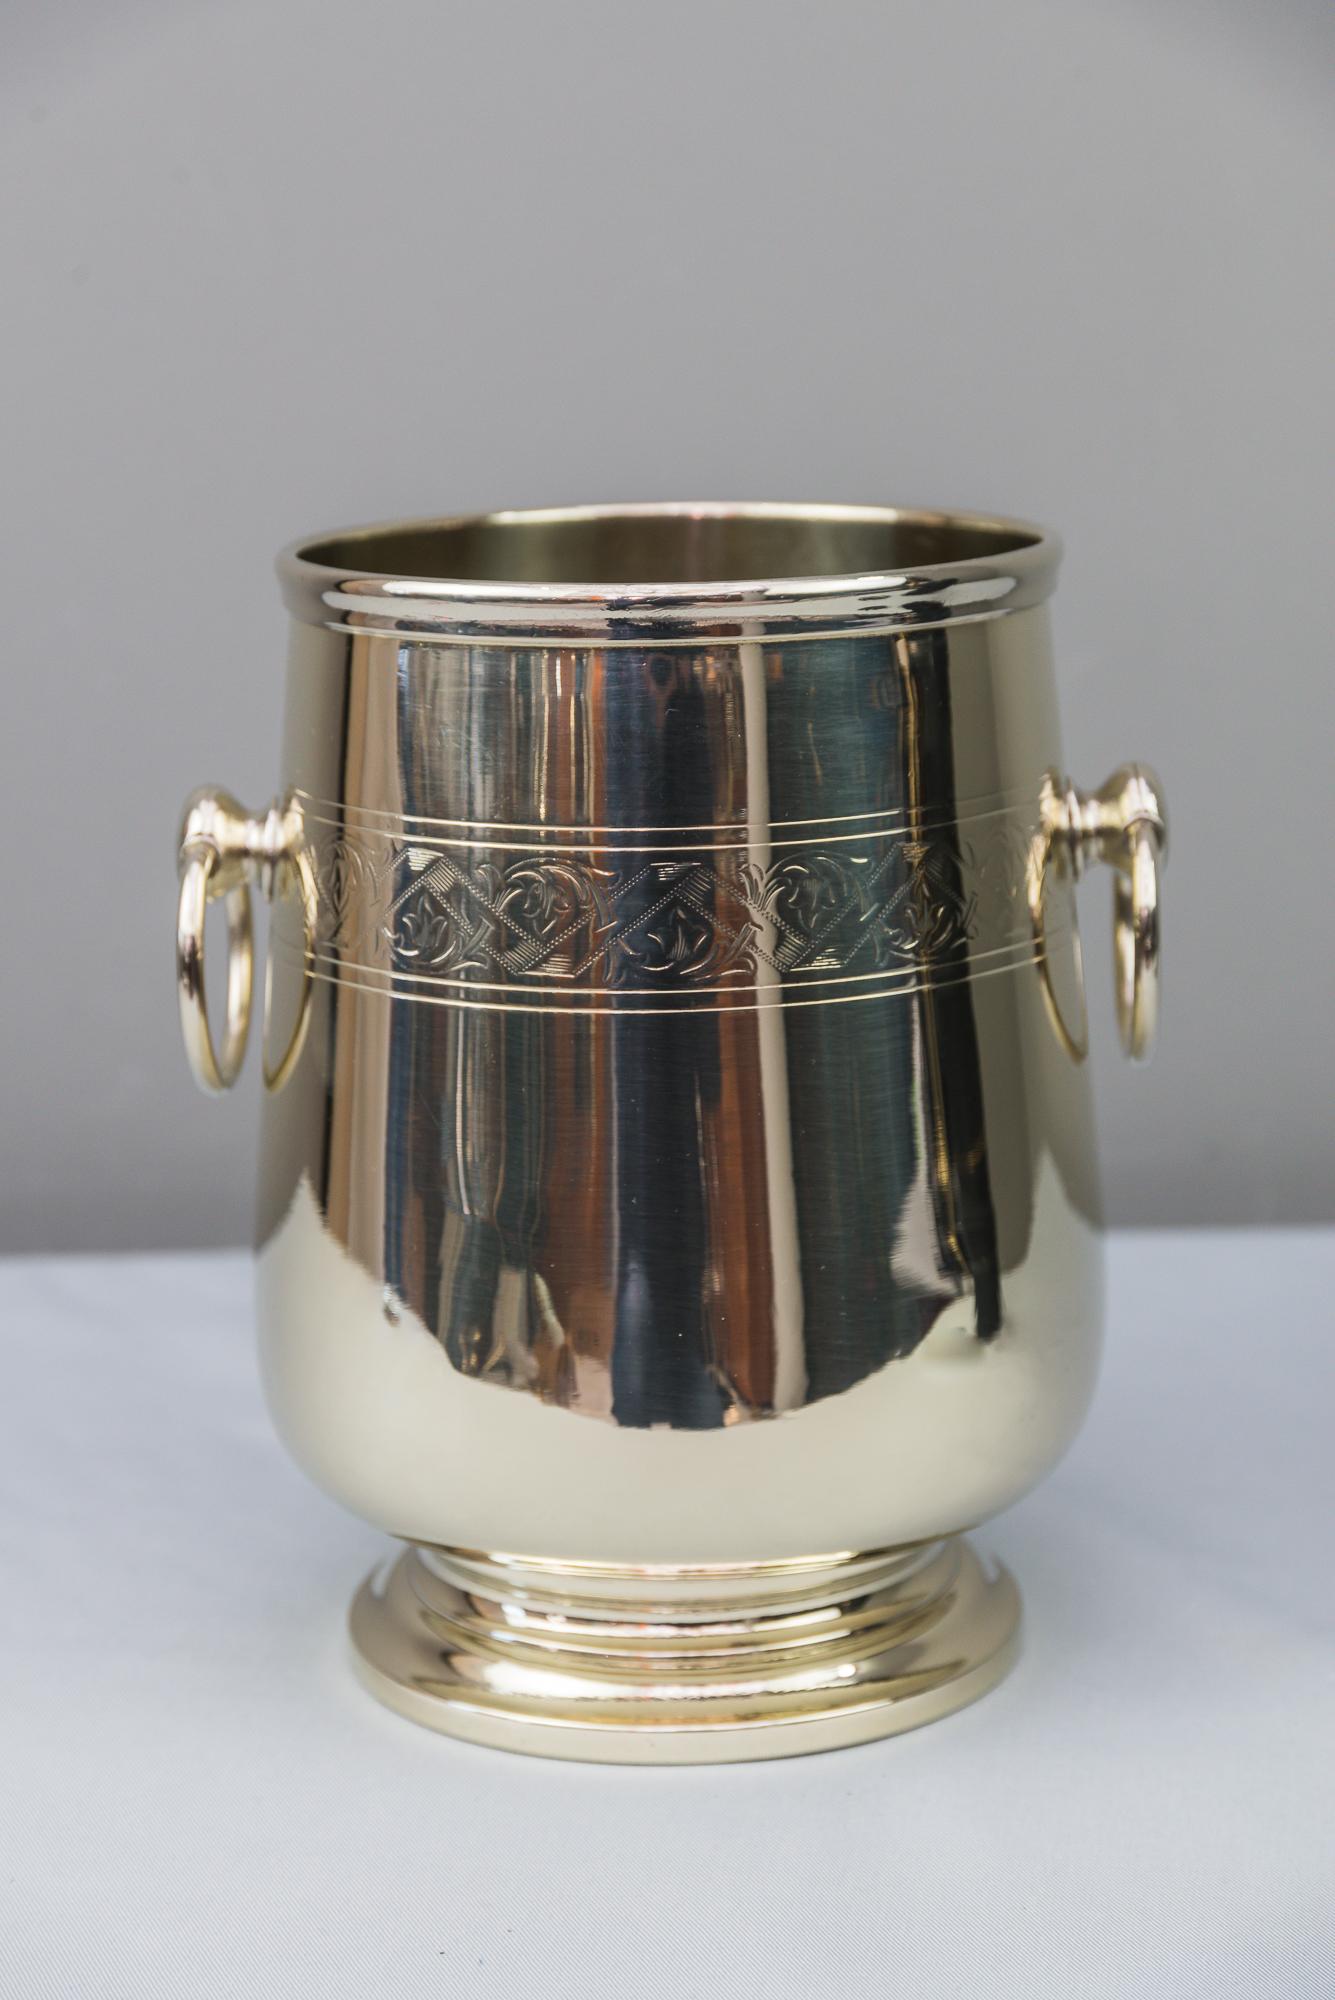 Art Deco Alpaca wine cooler, circa 1920s
Polished and stove enamelled.